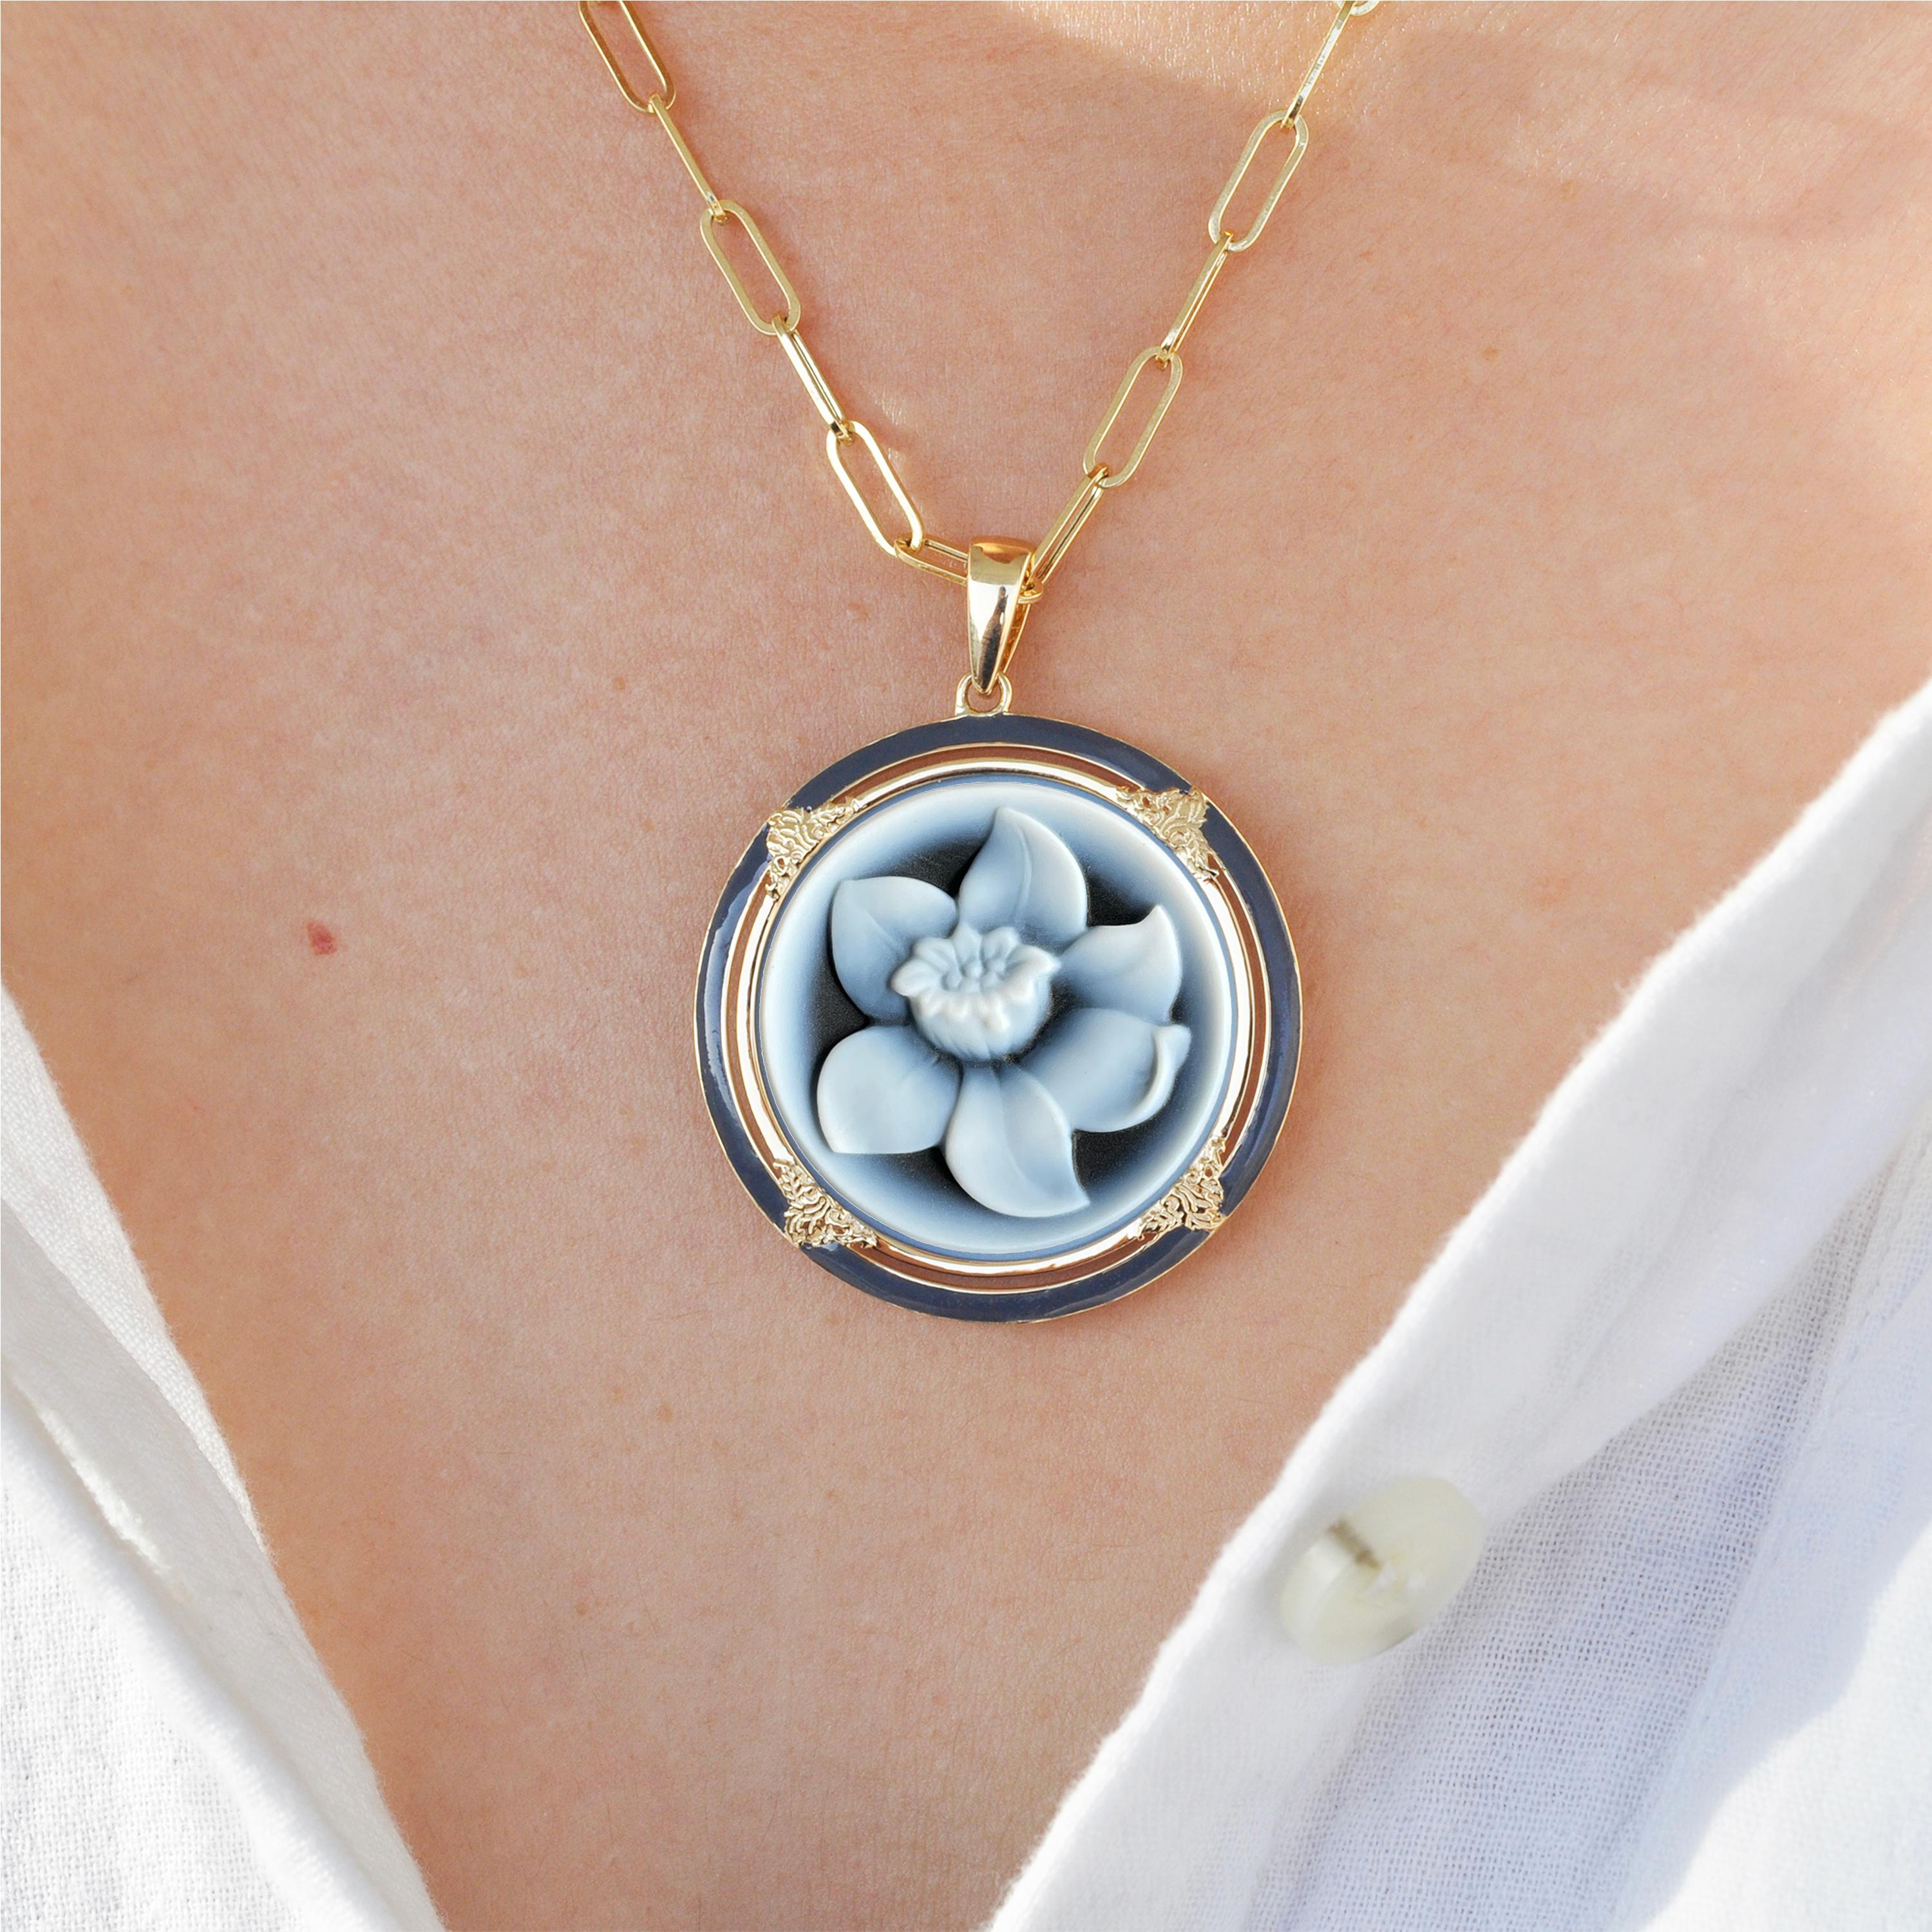 18 karat gold daffodil flower agate cameo enamel pendant

The cameo can be set in 18 karat gold featuring the daffodil cameo carved by our master german engraver on the relief of a natural agate gemstone. The size of the cameo is 24mm round which is